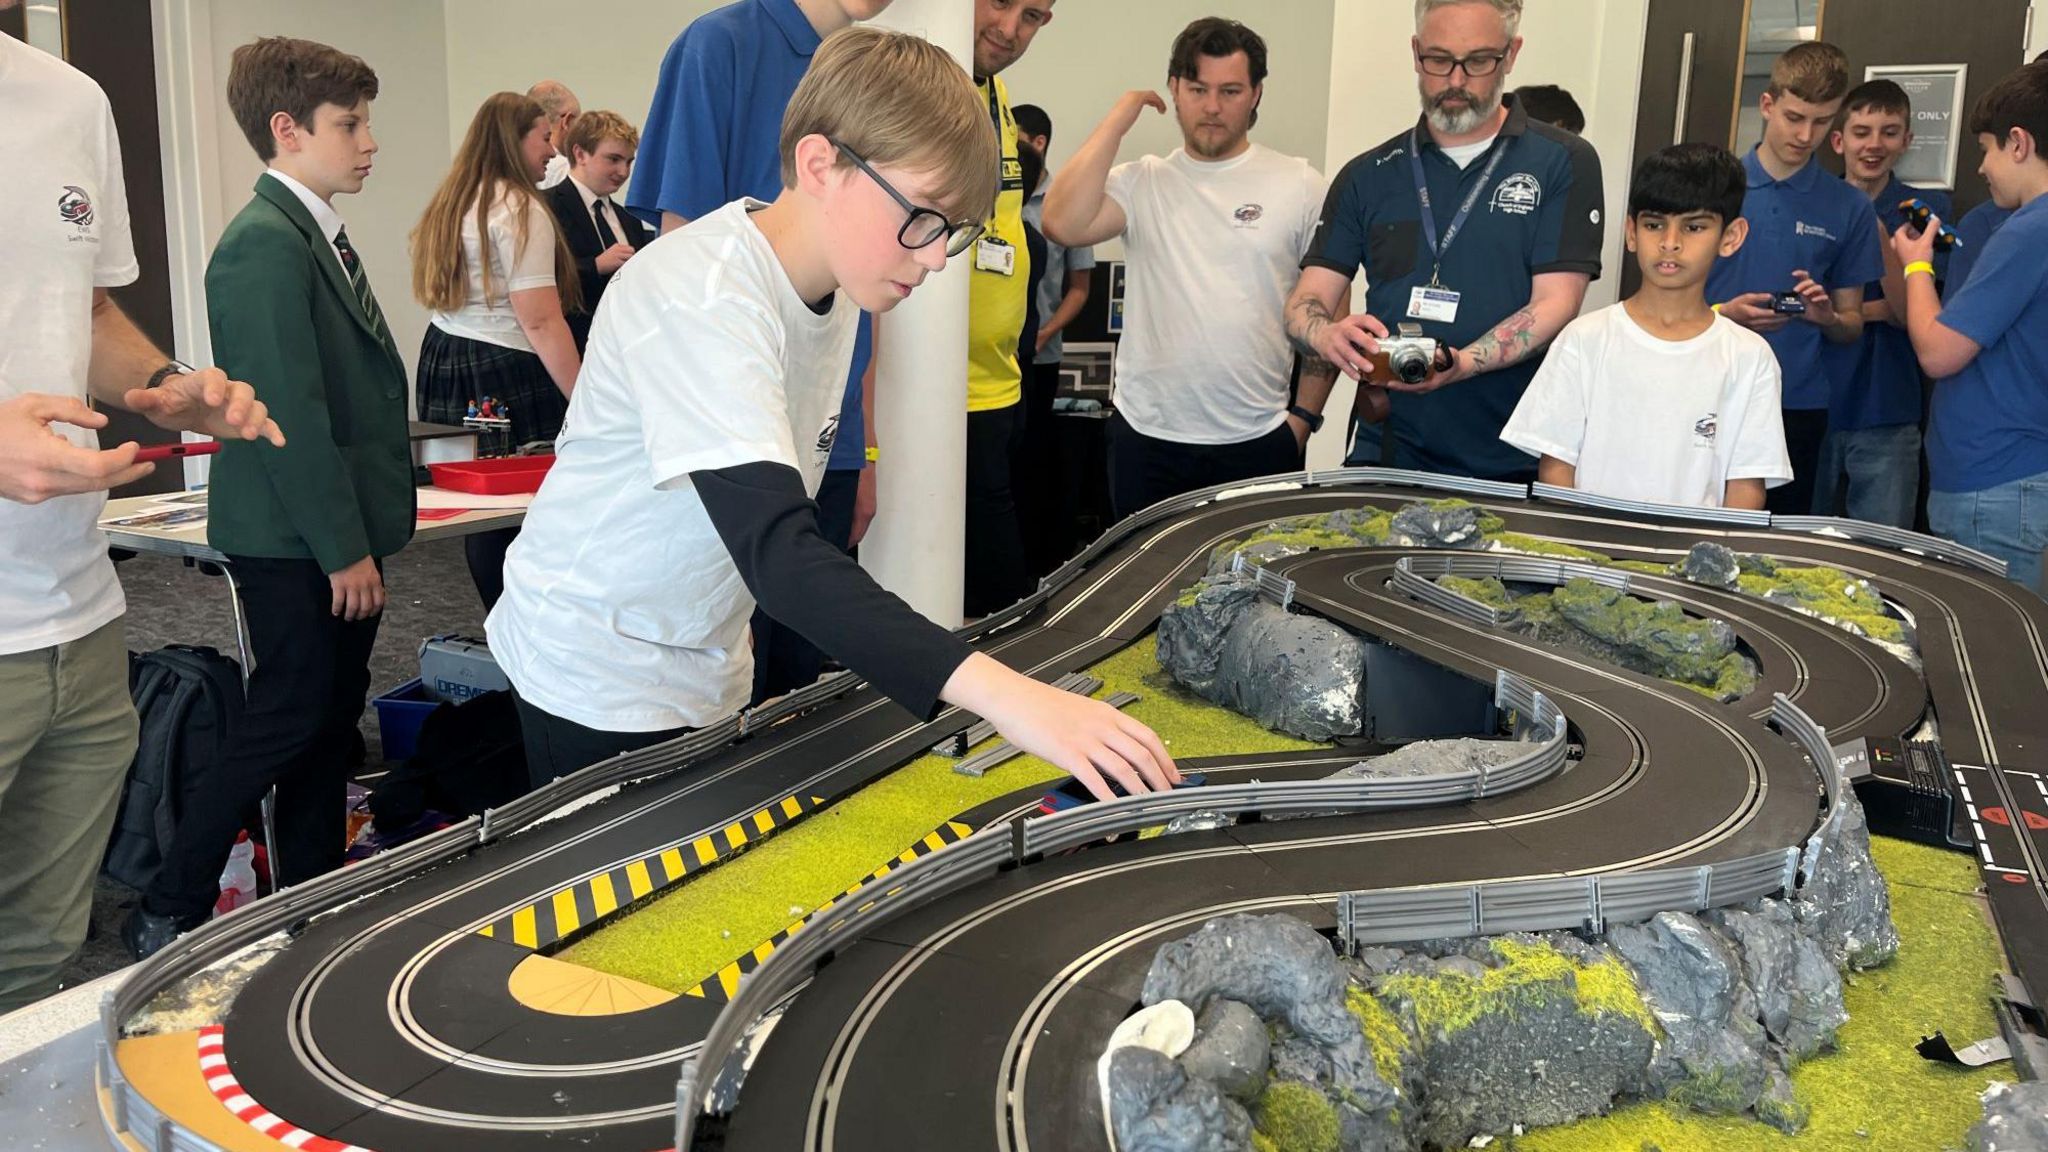 Child places a toy car onto a racing track with adults and children watching